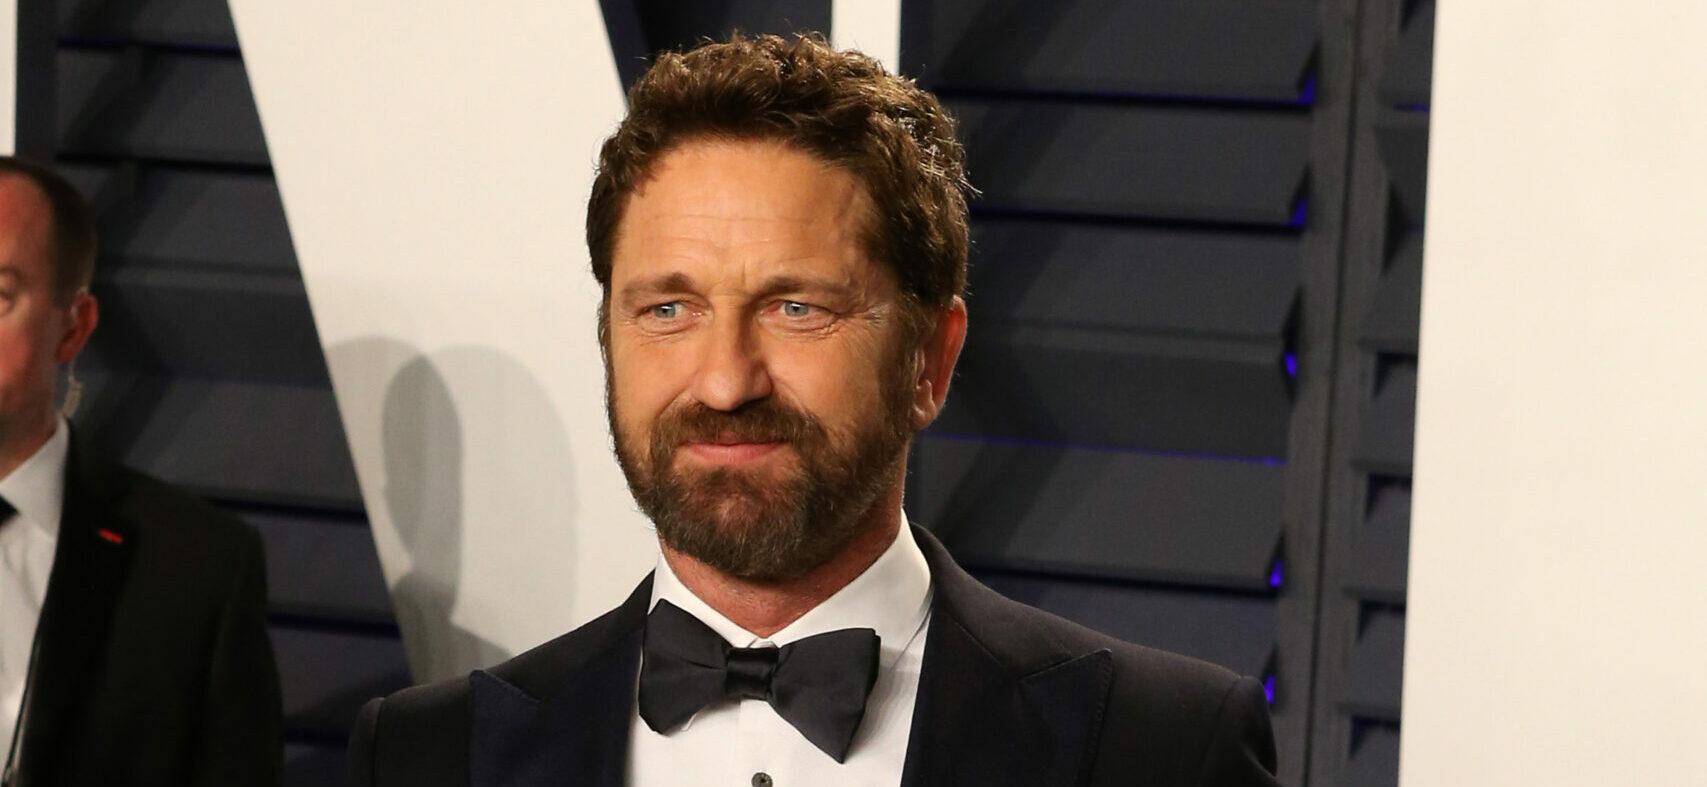 Gerard Butler Unknowingly Rubbed Acid All Over His Face On The Set Of His New Movie ‘Plane’